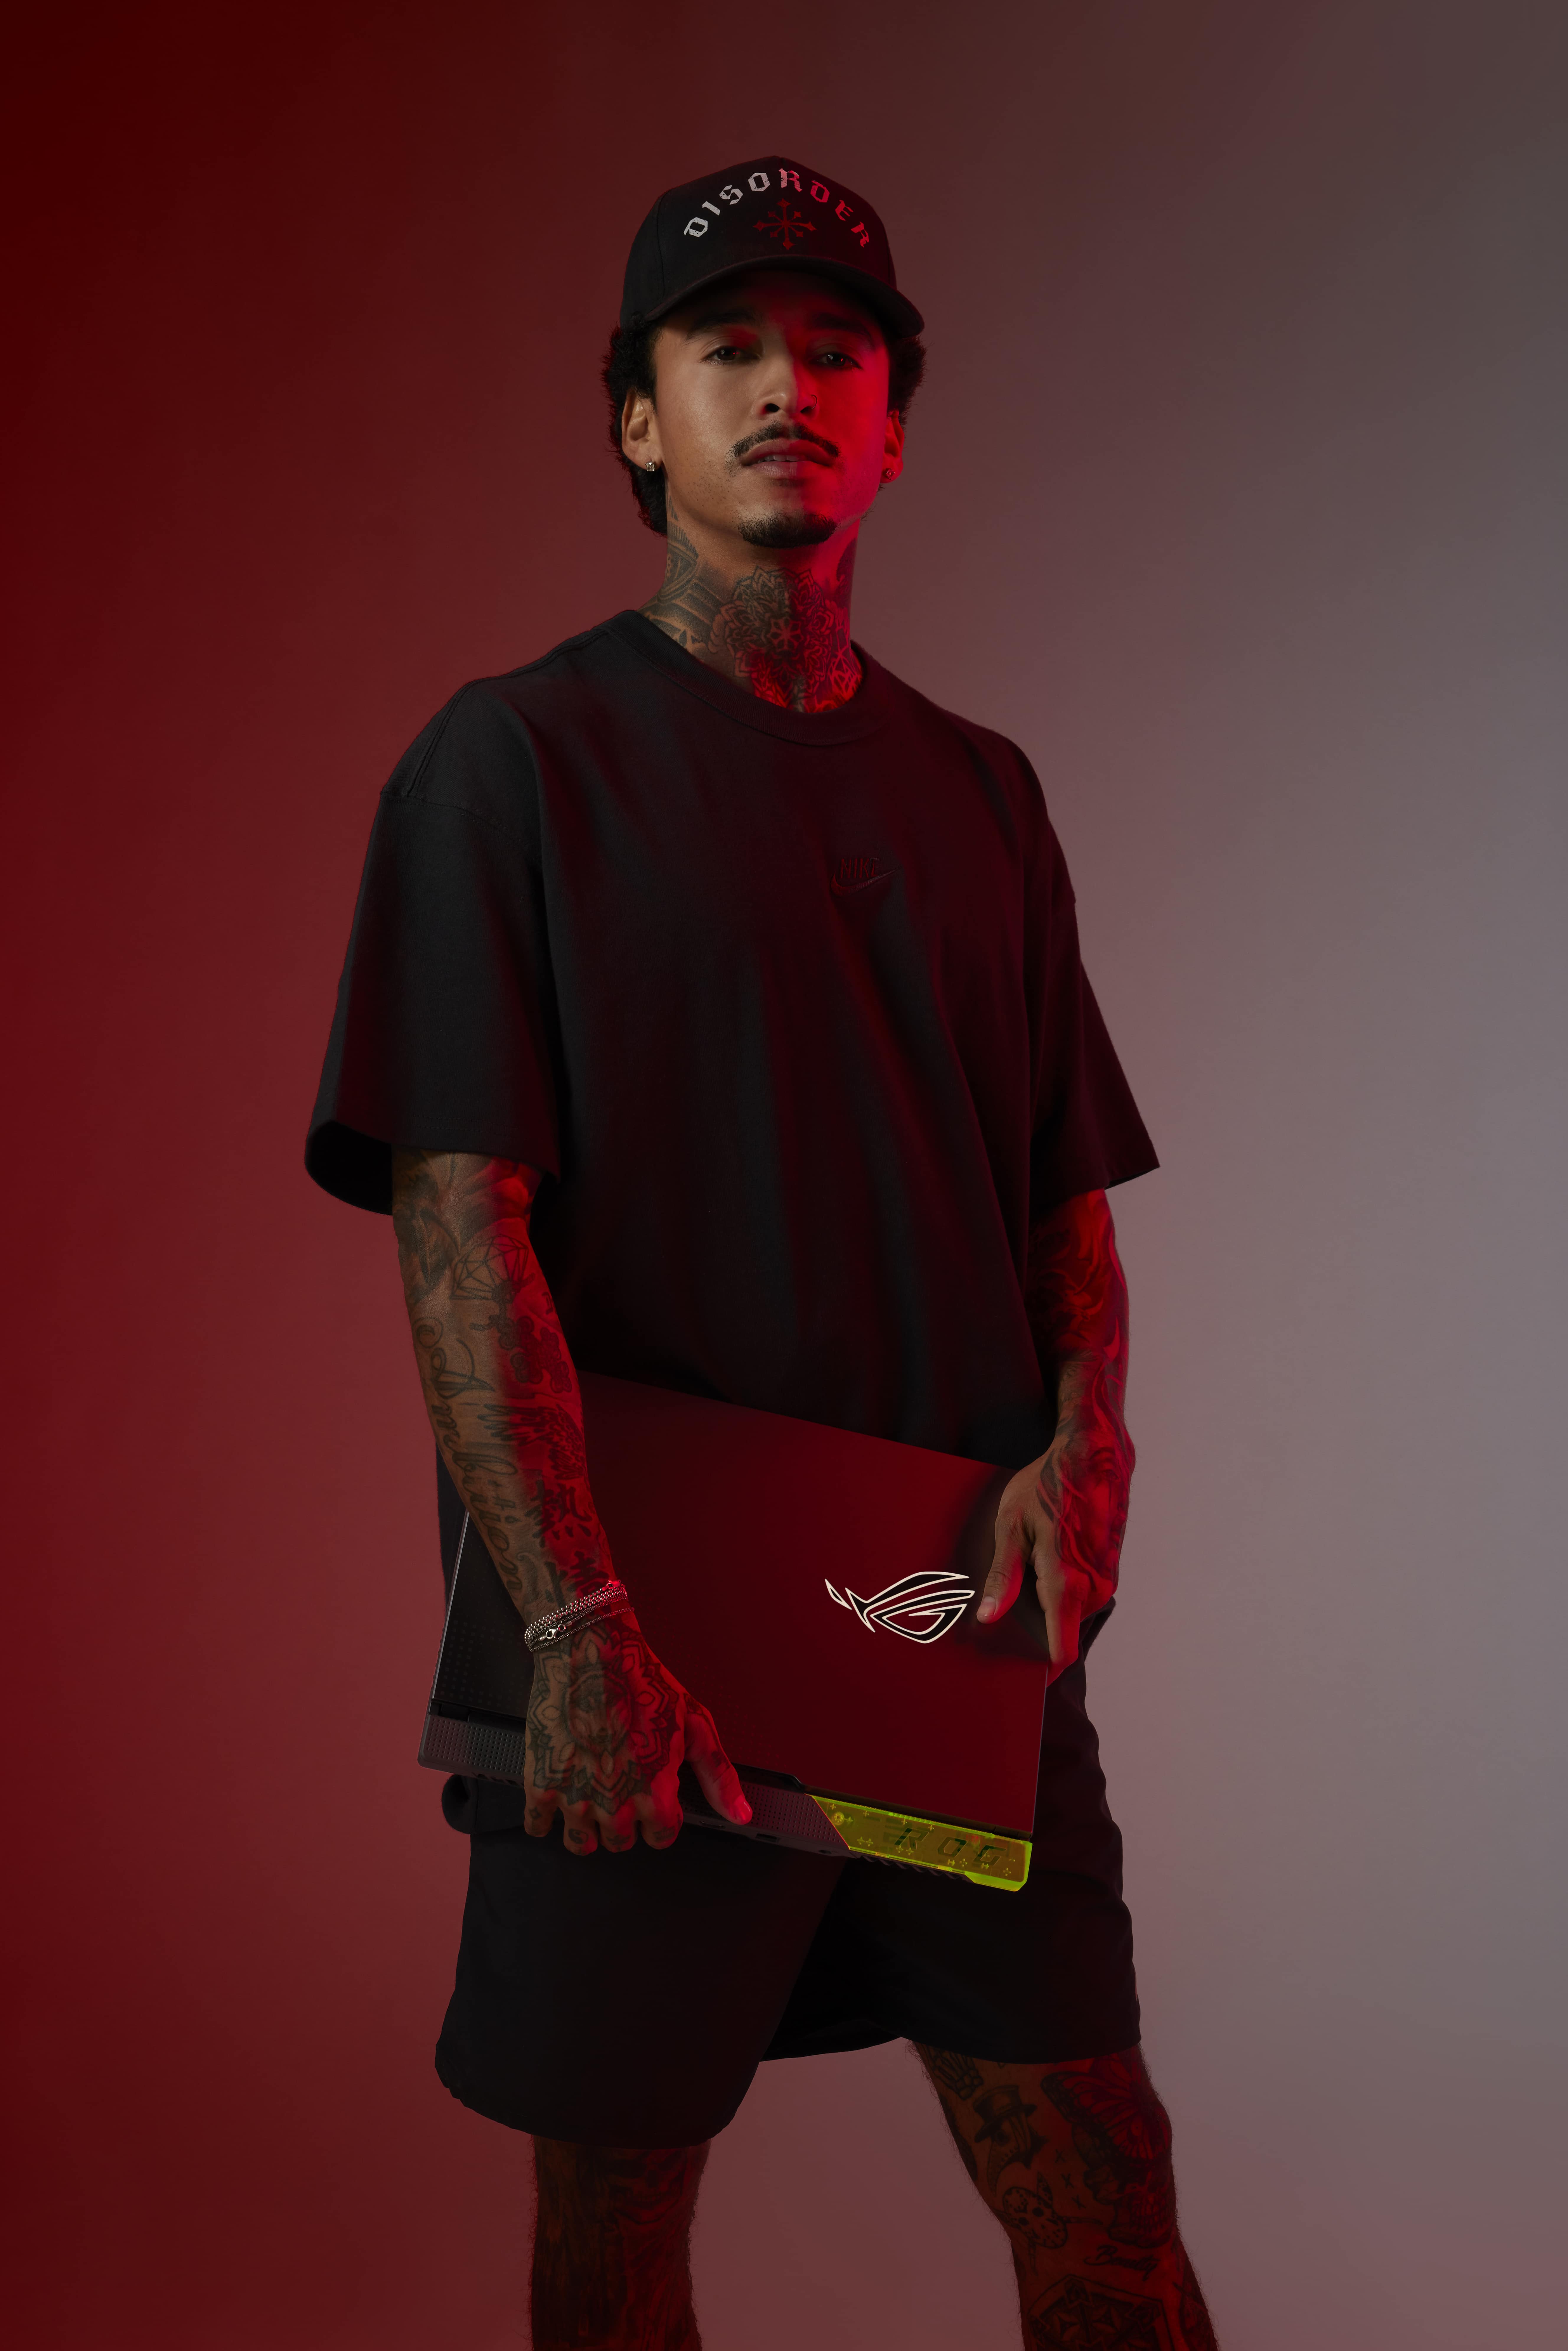 Skateboarder Nyjah Huston stands apart from the crowd with his ROG Strix G. MMOSITE - Thông tin công nghệ, review, thủ thuật PC, gaming